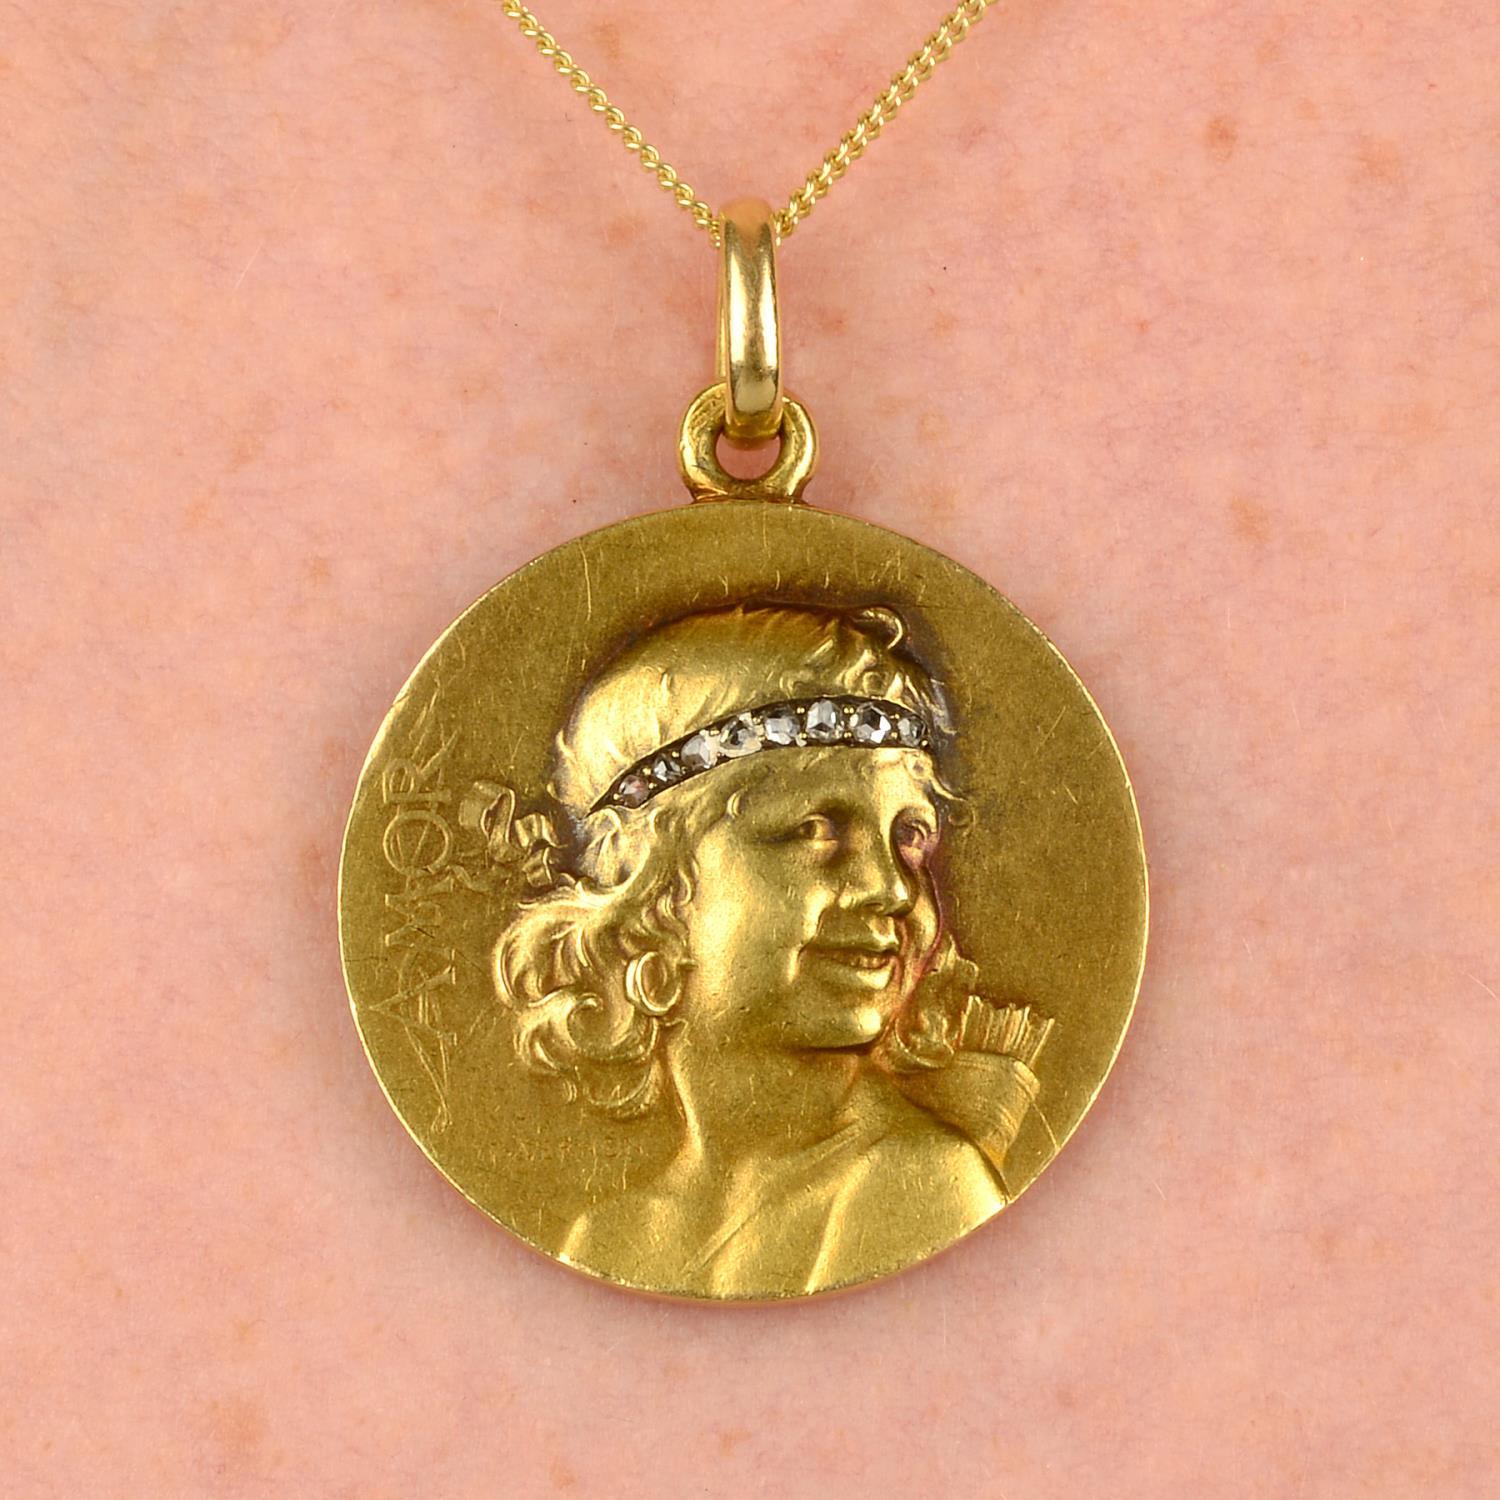 A beautiful French Art Nouveau gold medallion pendant that was made by JFrédéric Charles Victor de Vernon. This pendant was made circa 1900 and is in the Art Nouveau style that was prevalent at the time. It features a lovely girl with a rose-cut